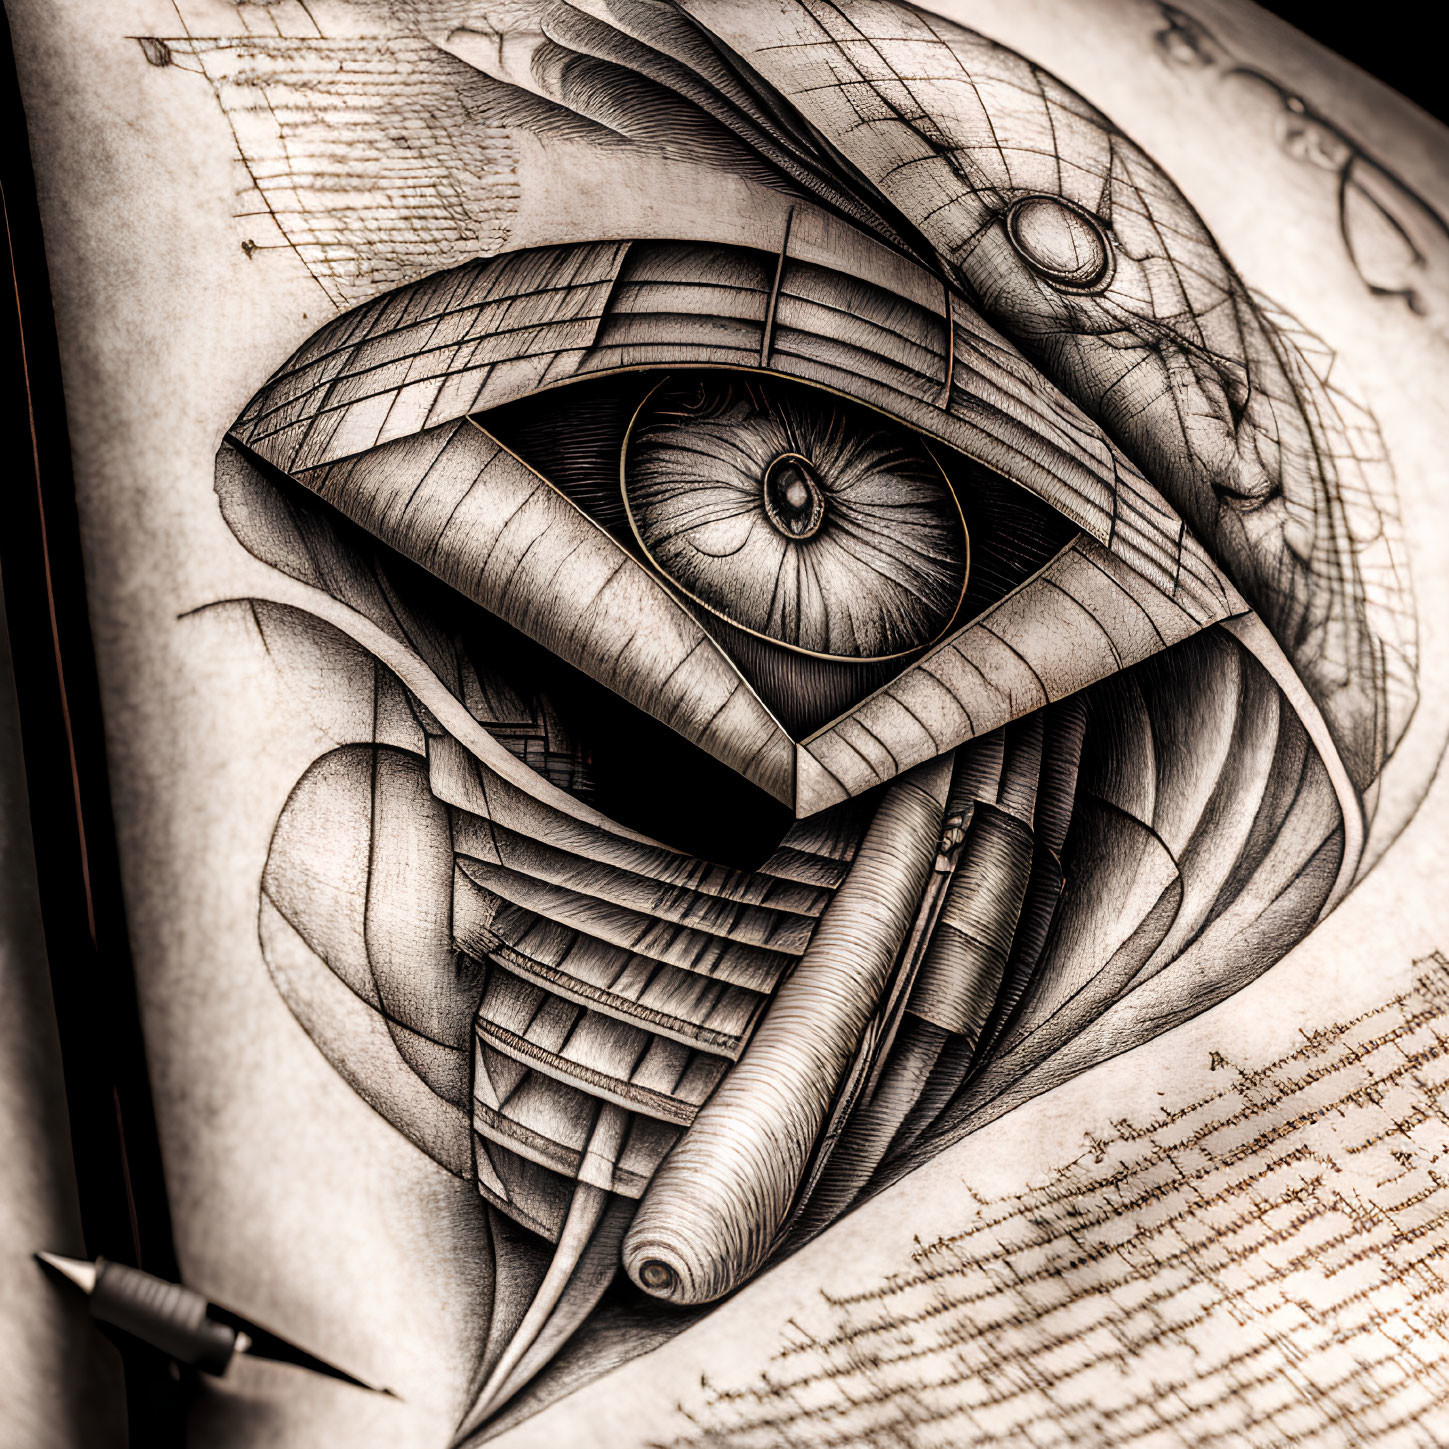 Surrealist drawing of eye with architectural elements and geometrical patterns